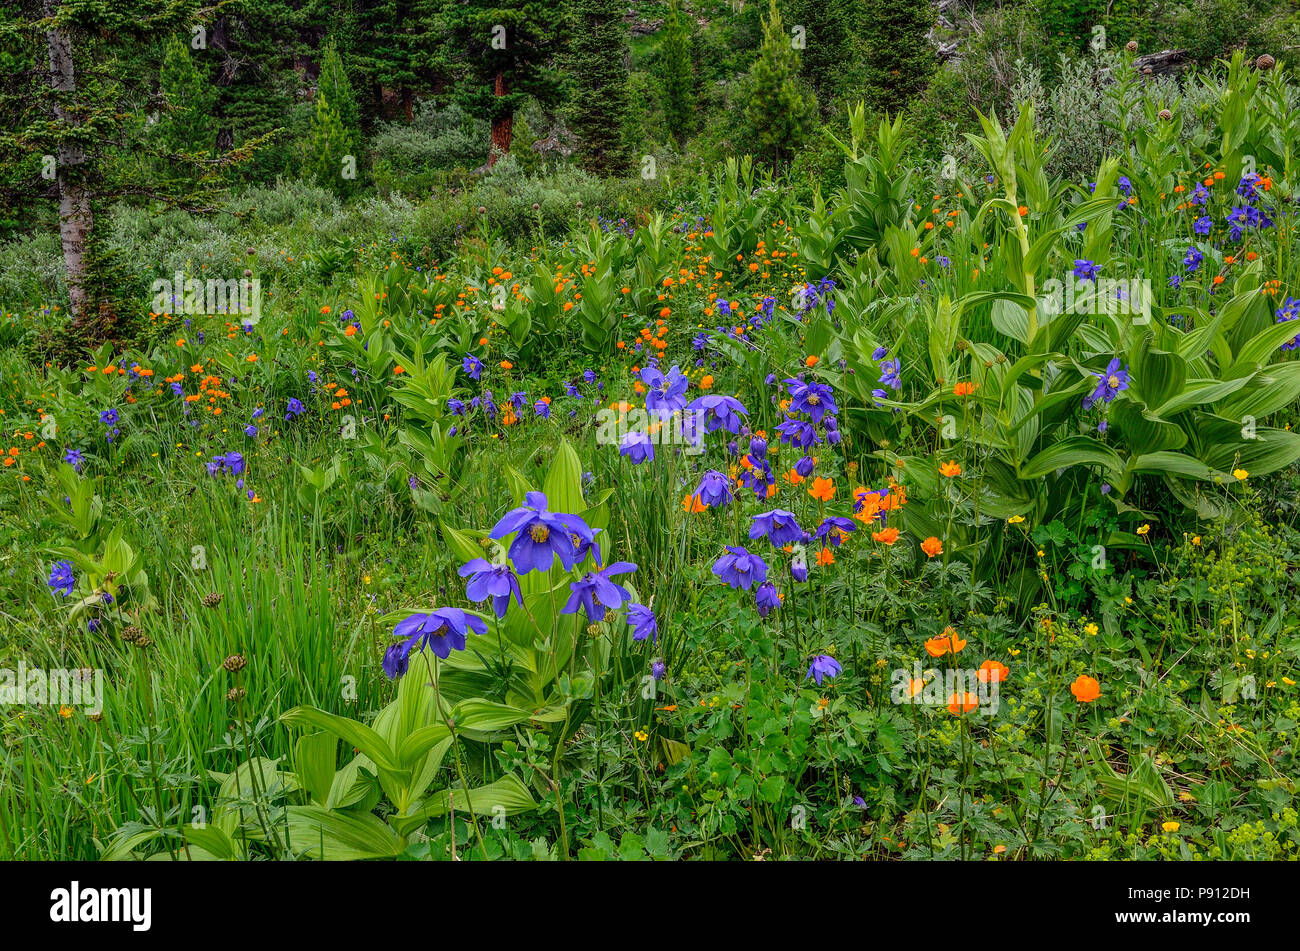 Picturesque floral summer background - blossoming alpine meadow with colorful wild flowers close up: blue aquilegia, orange buttercups and other herbs Stock Photo